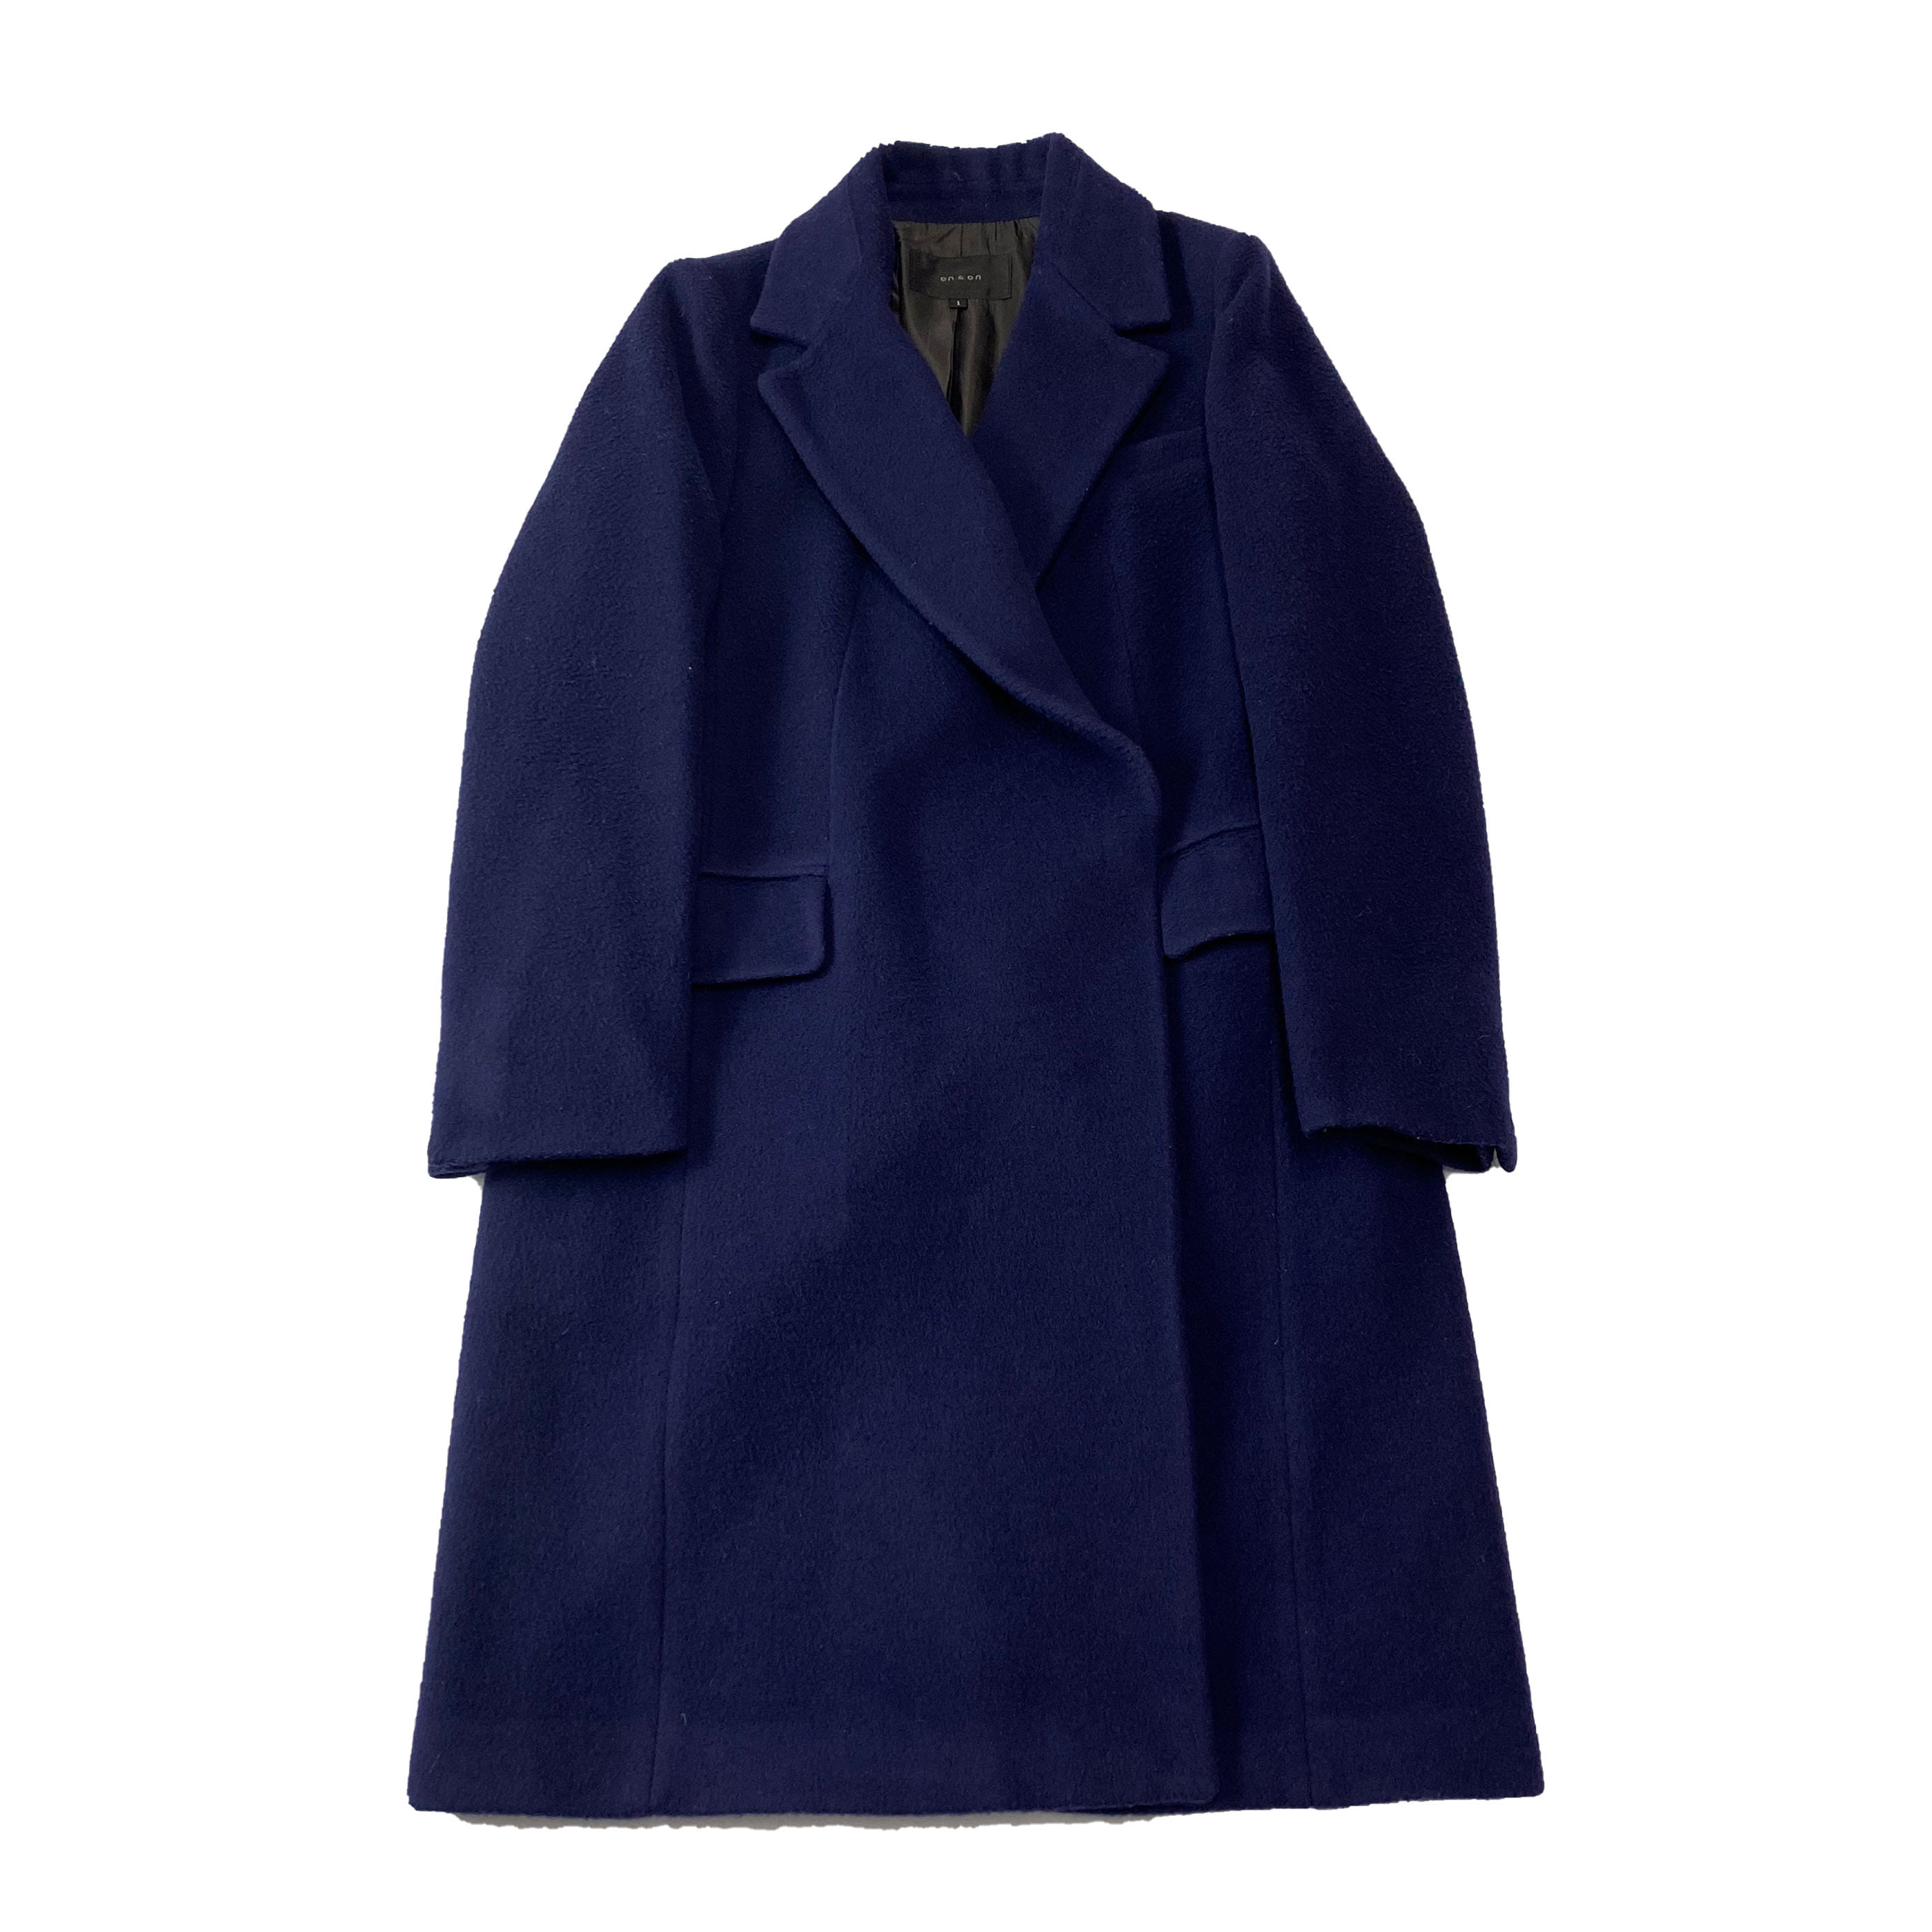 [On &amp; On] double breasted blue coat - Size S (01)